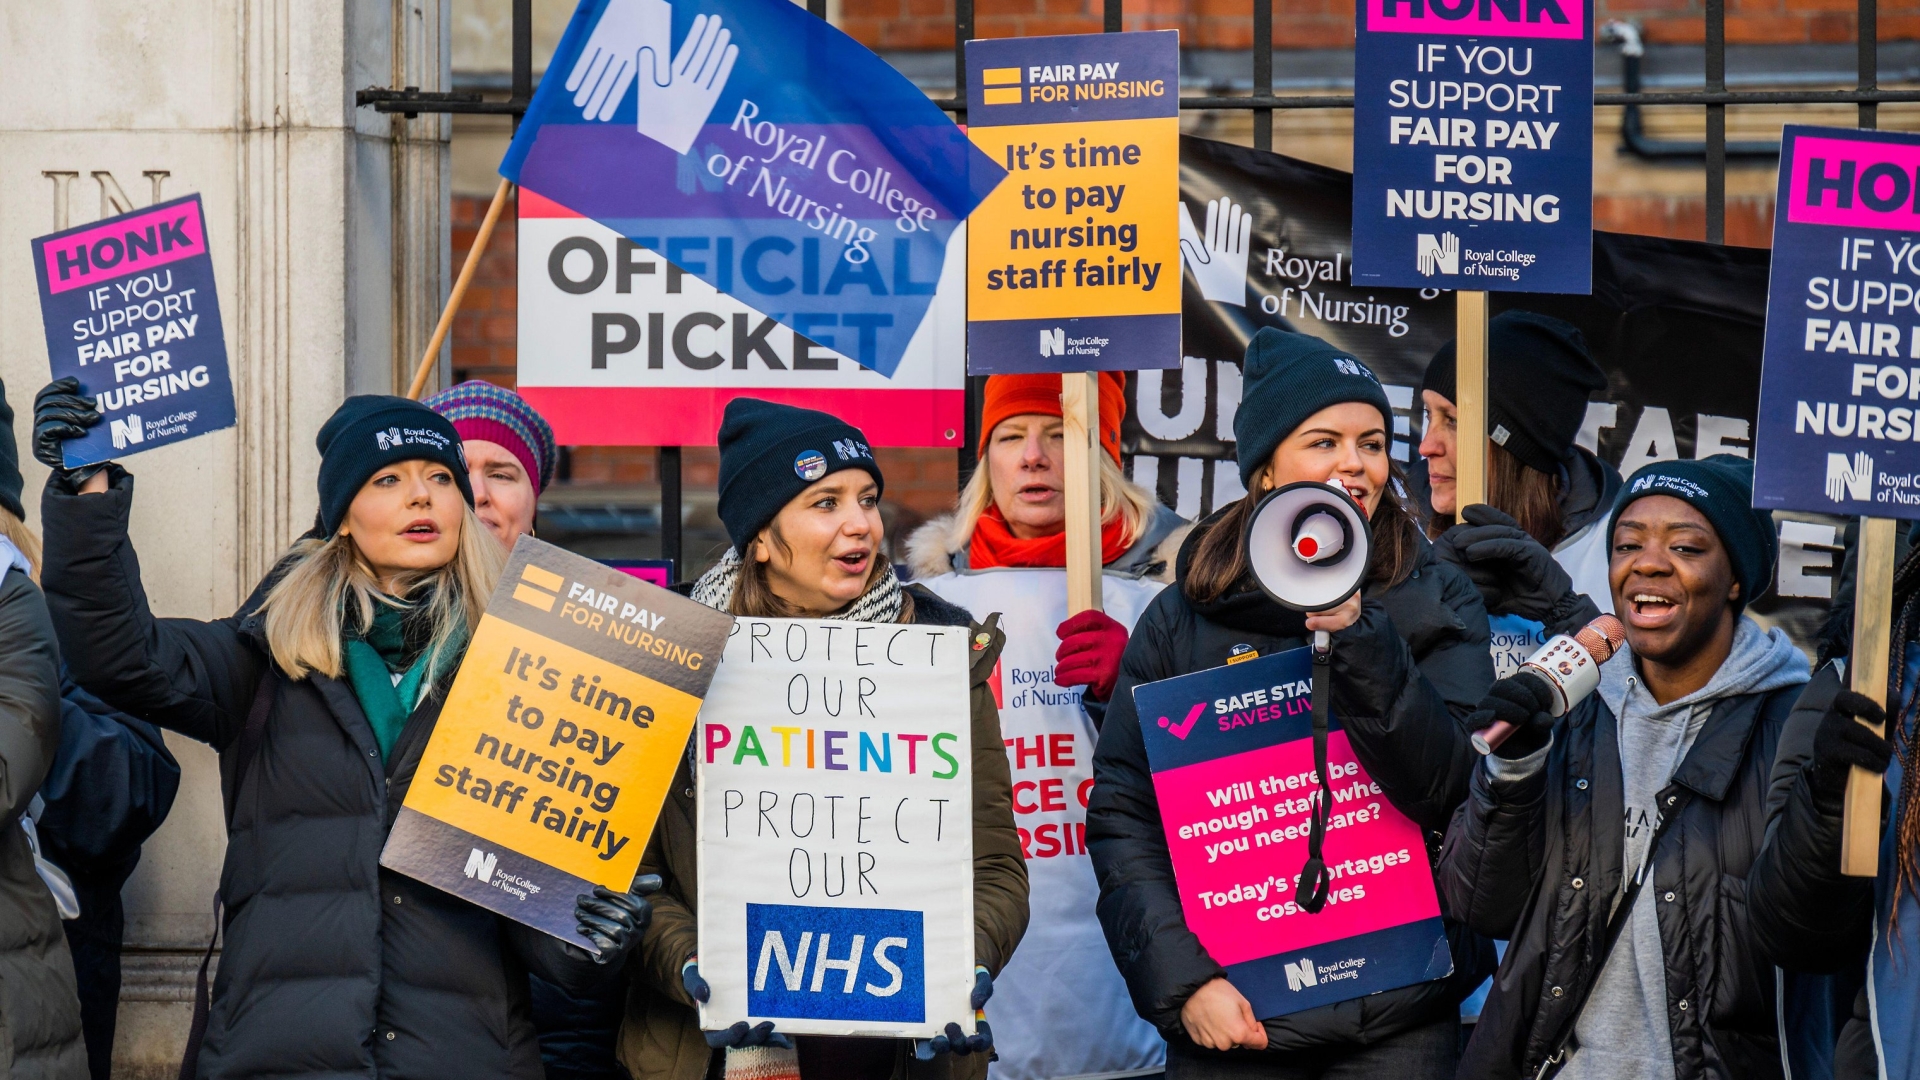 Brits told to utilise NHS services “wisely” after nurses start their strike